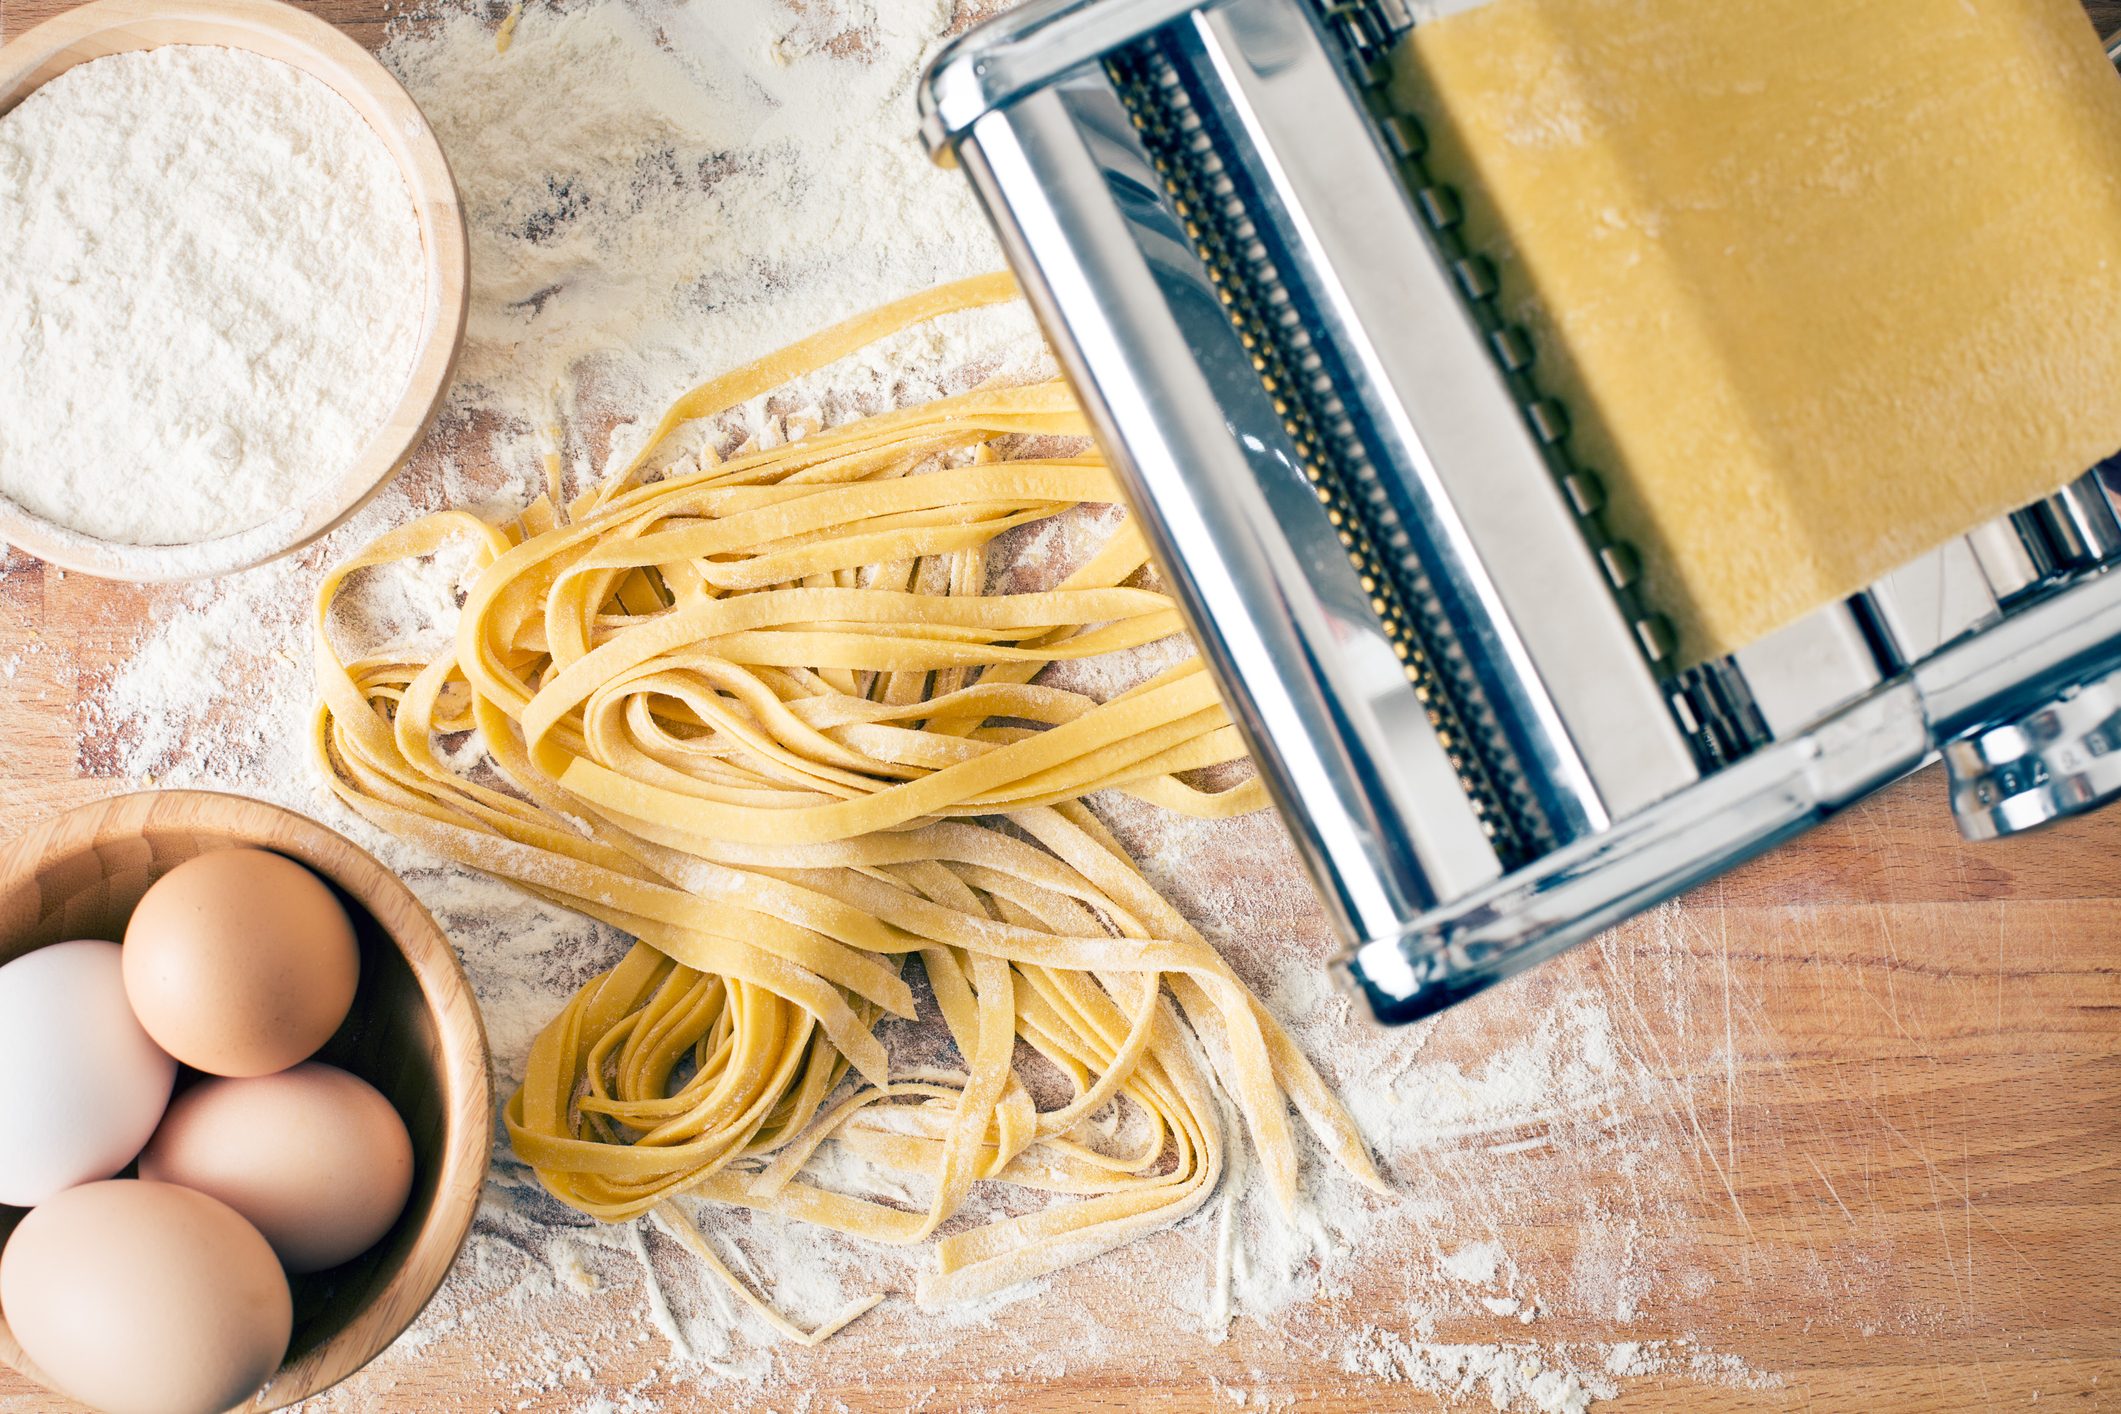 Easy Homemade Pasta - Without a Pasta Machine - Nicky's Kitchen